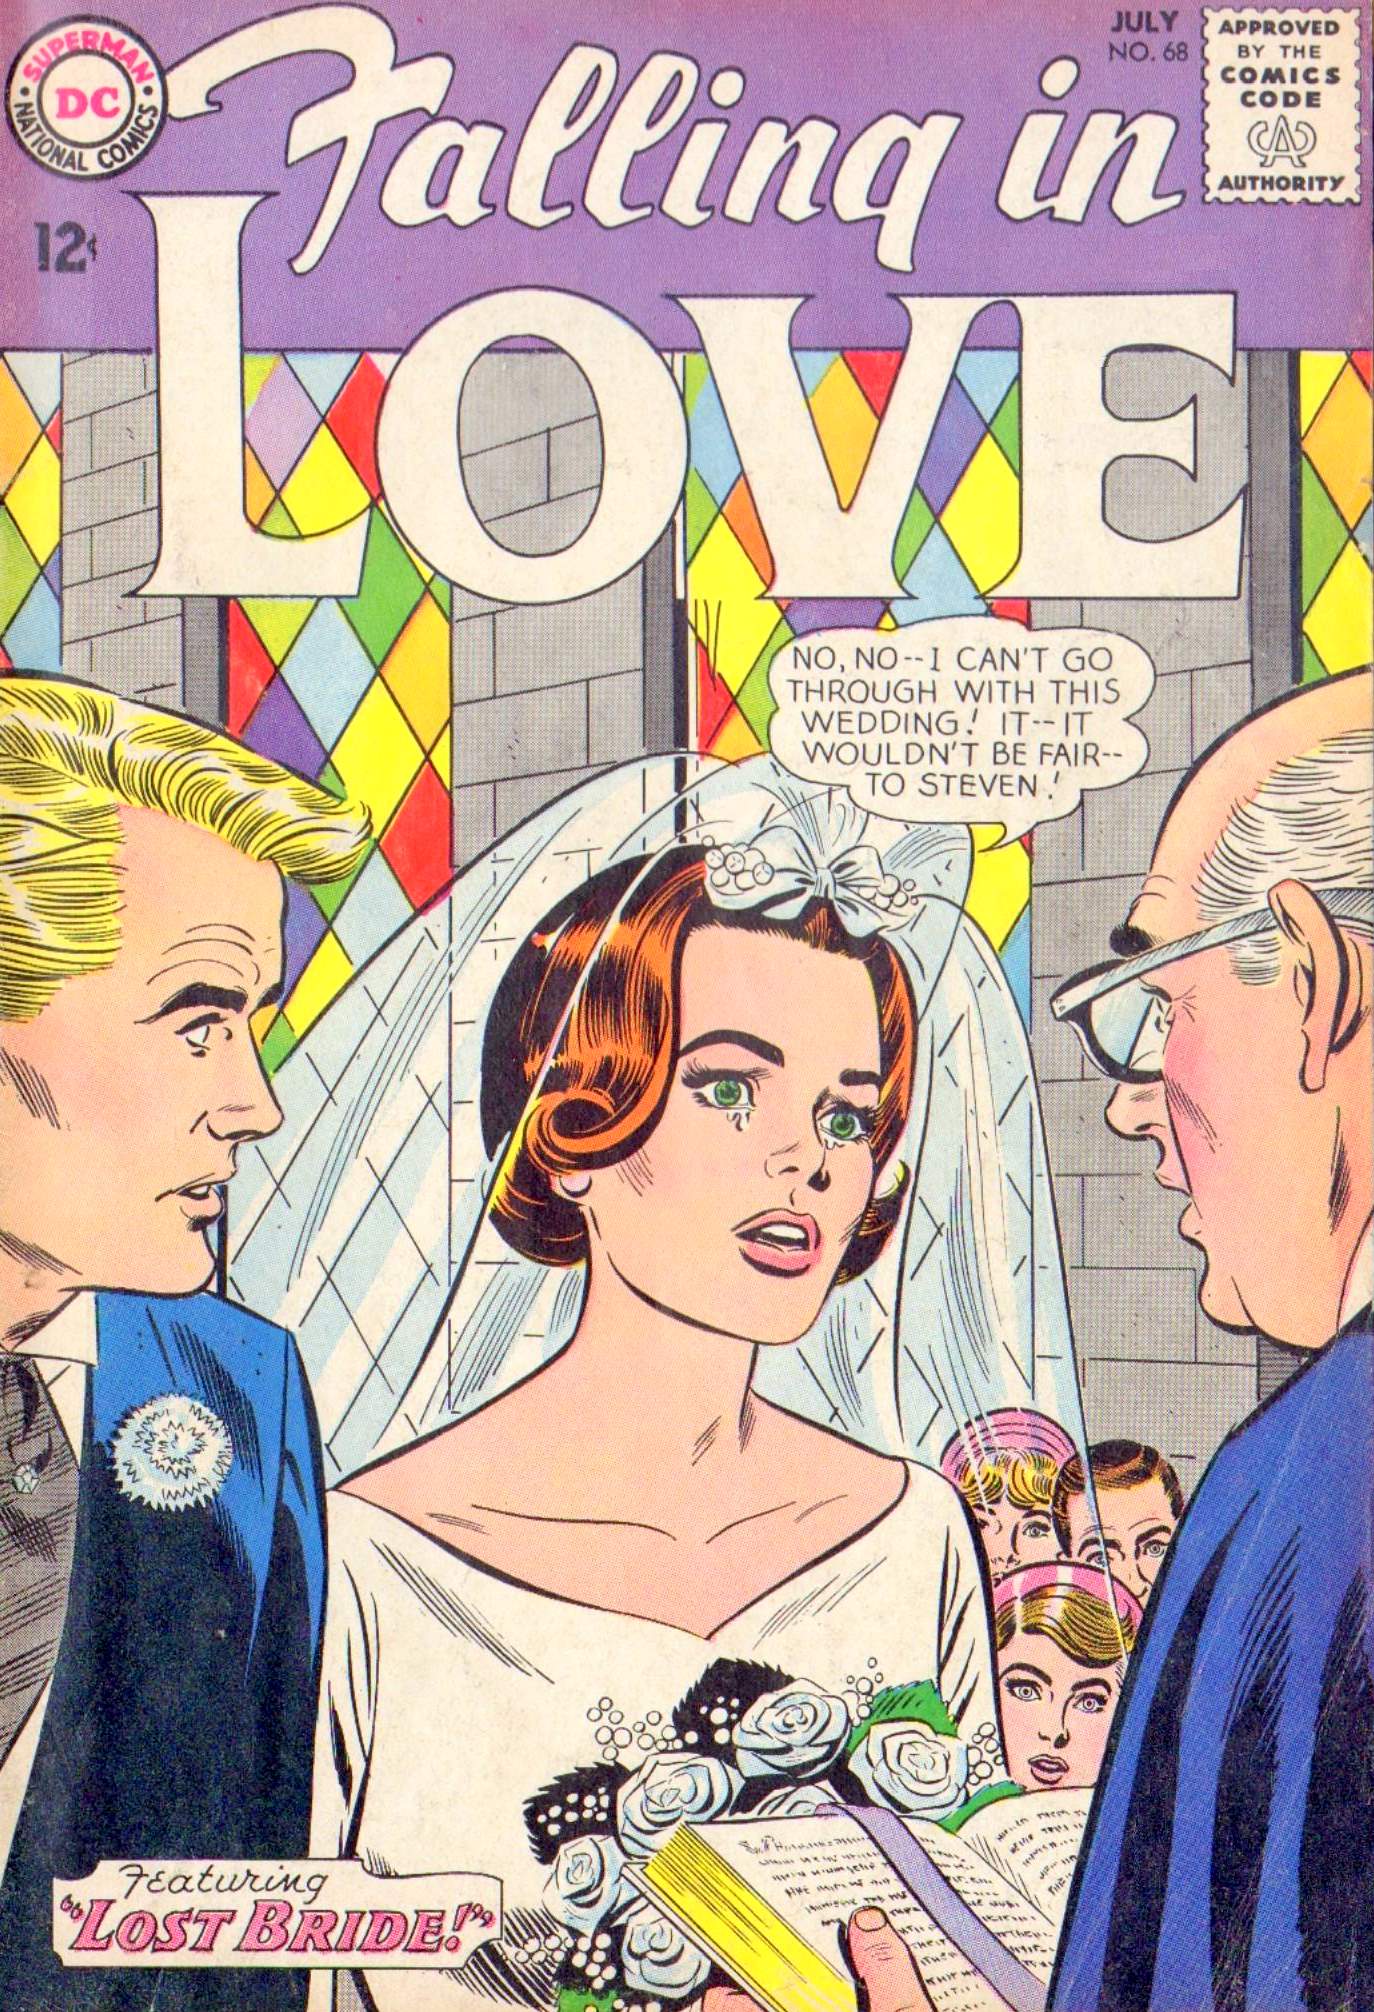 Issue love. Comics marriage.